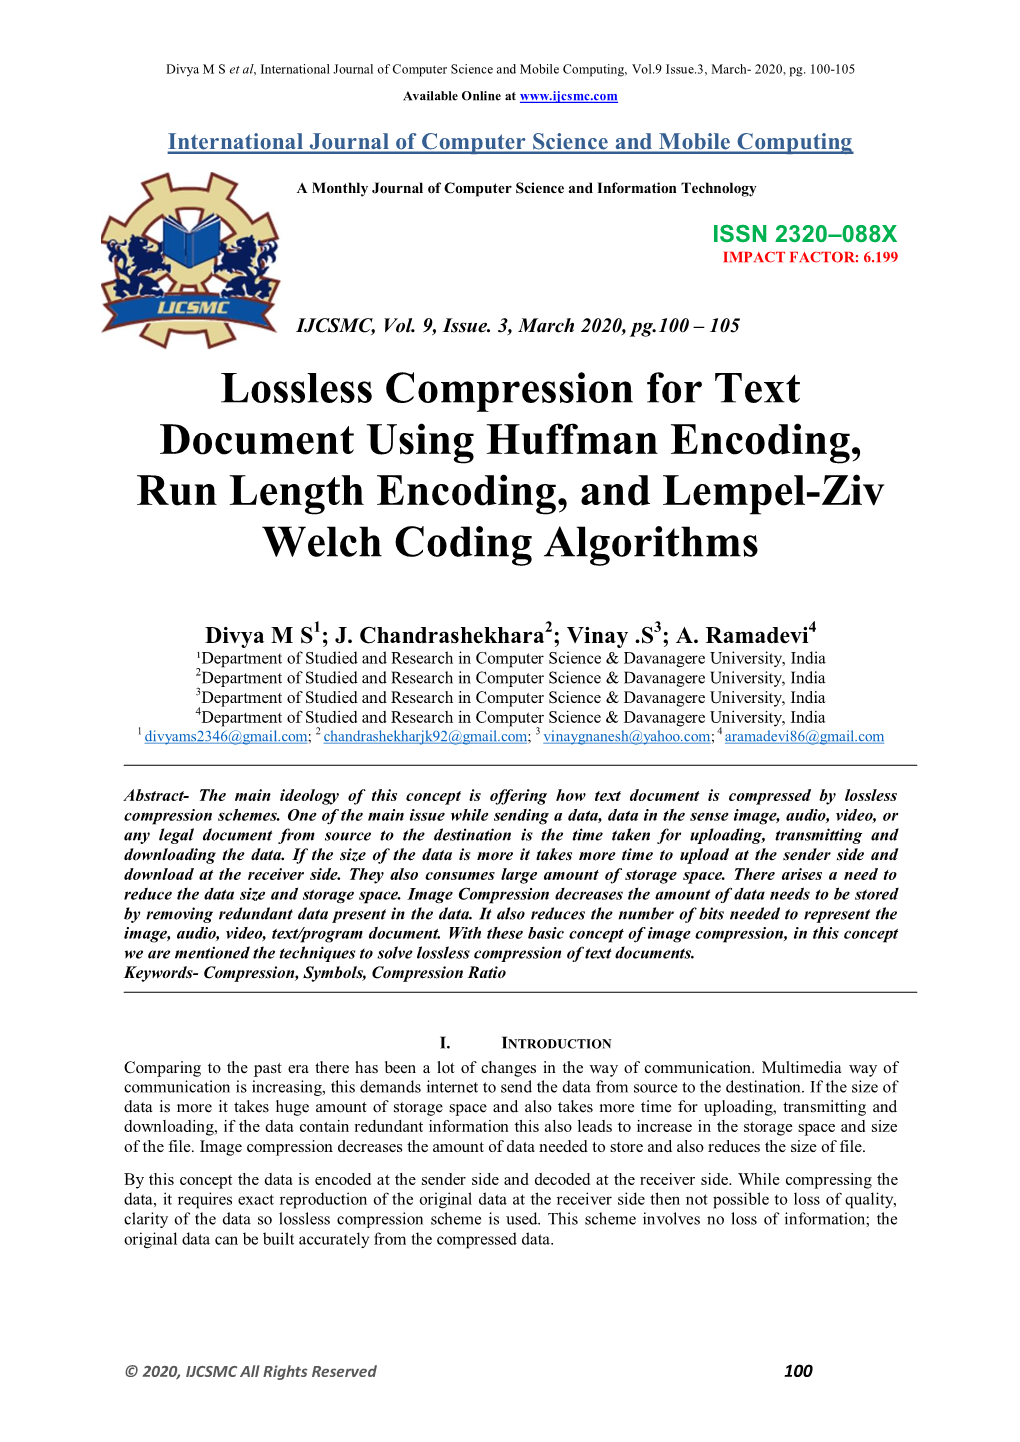 Lossless Compression for Text Document Using Huffman Encoding, Run Length Encoding, and Lempel-Ziv Welch Coding Algorithms